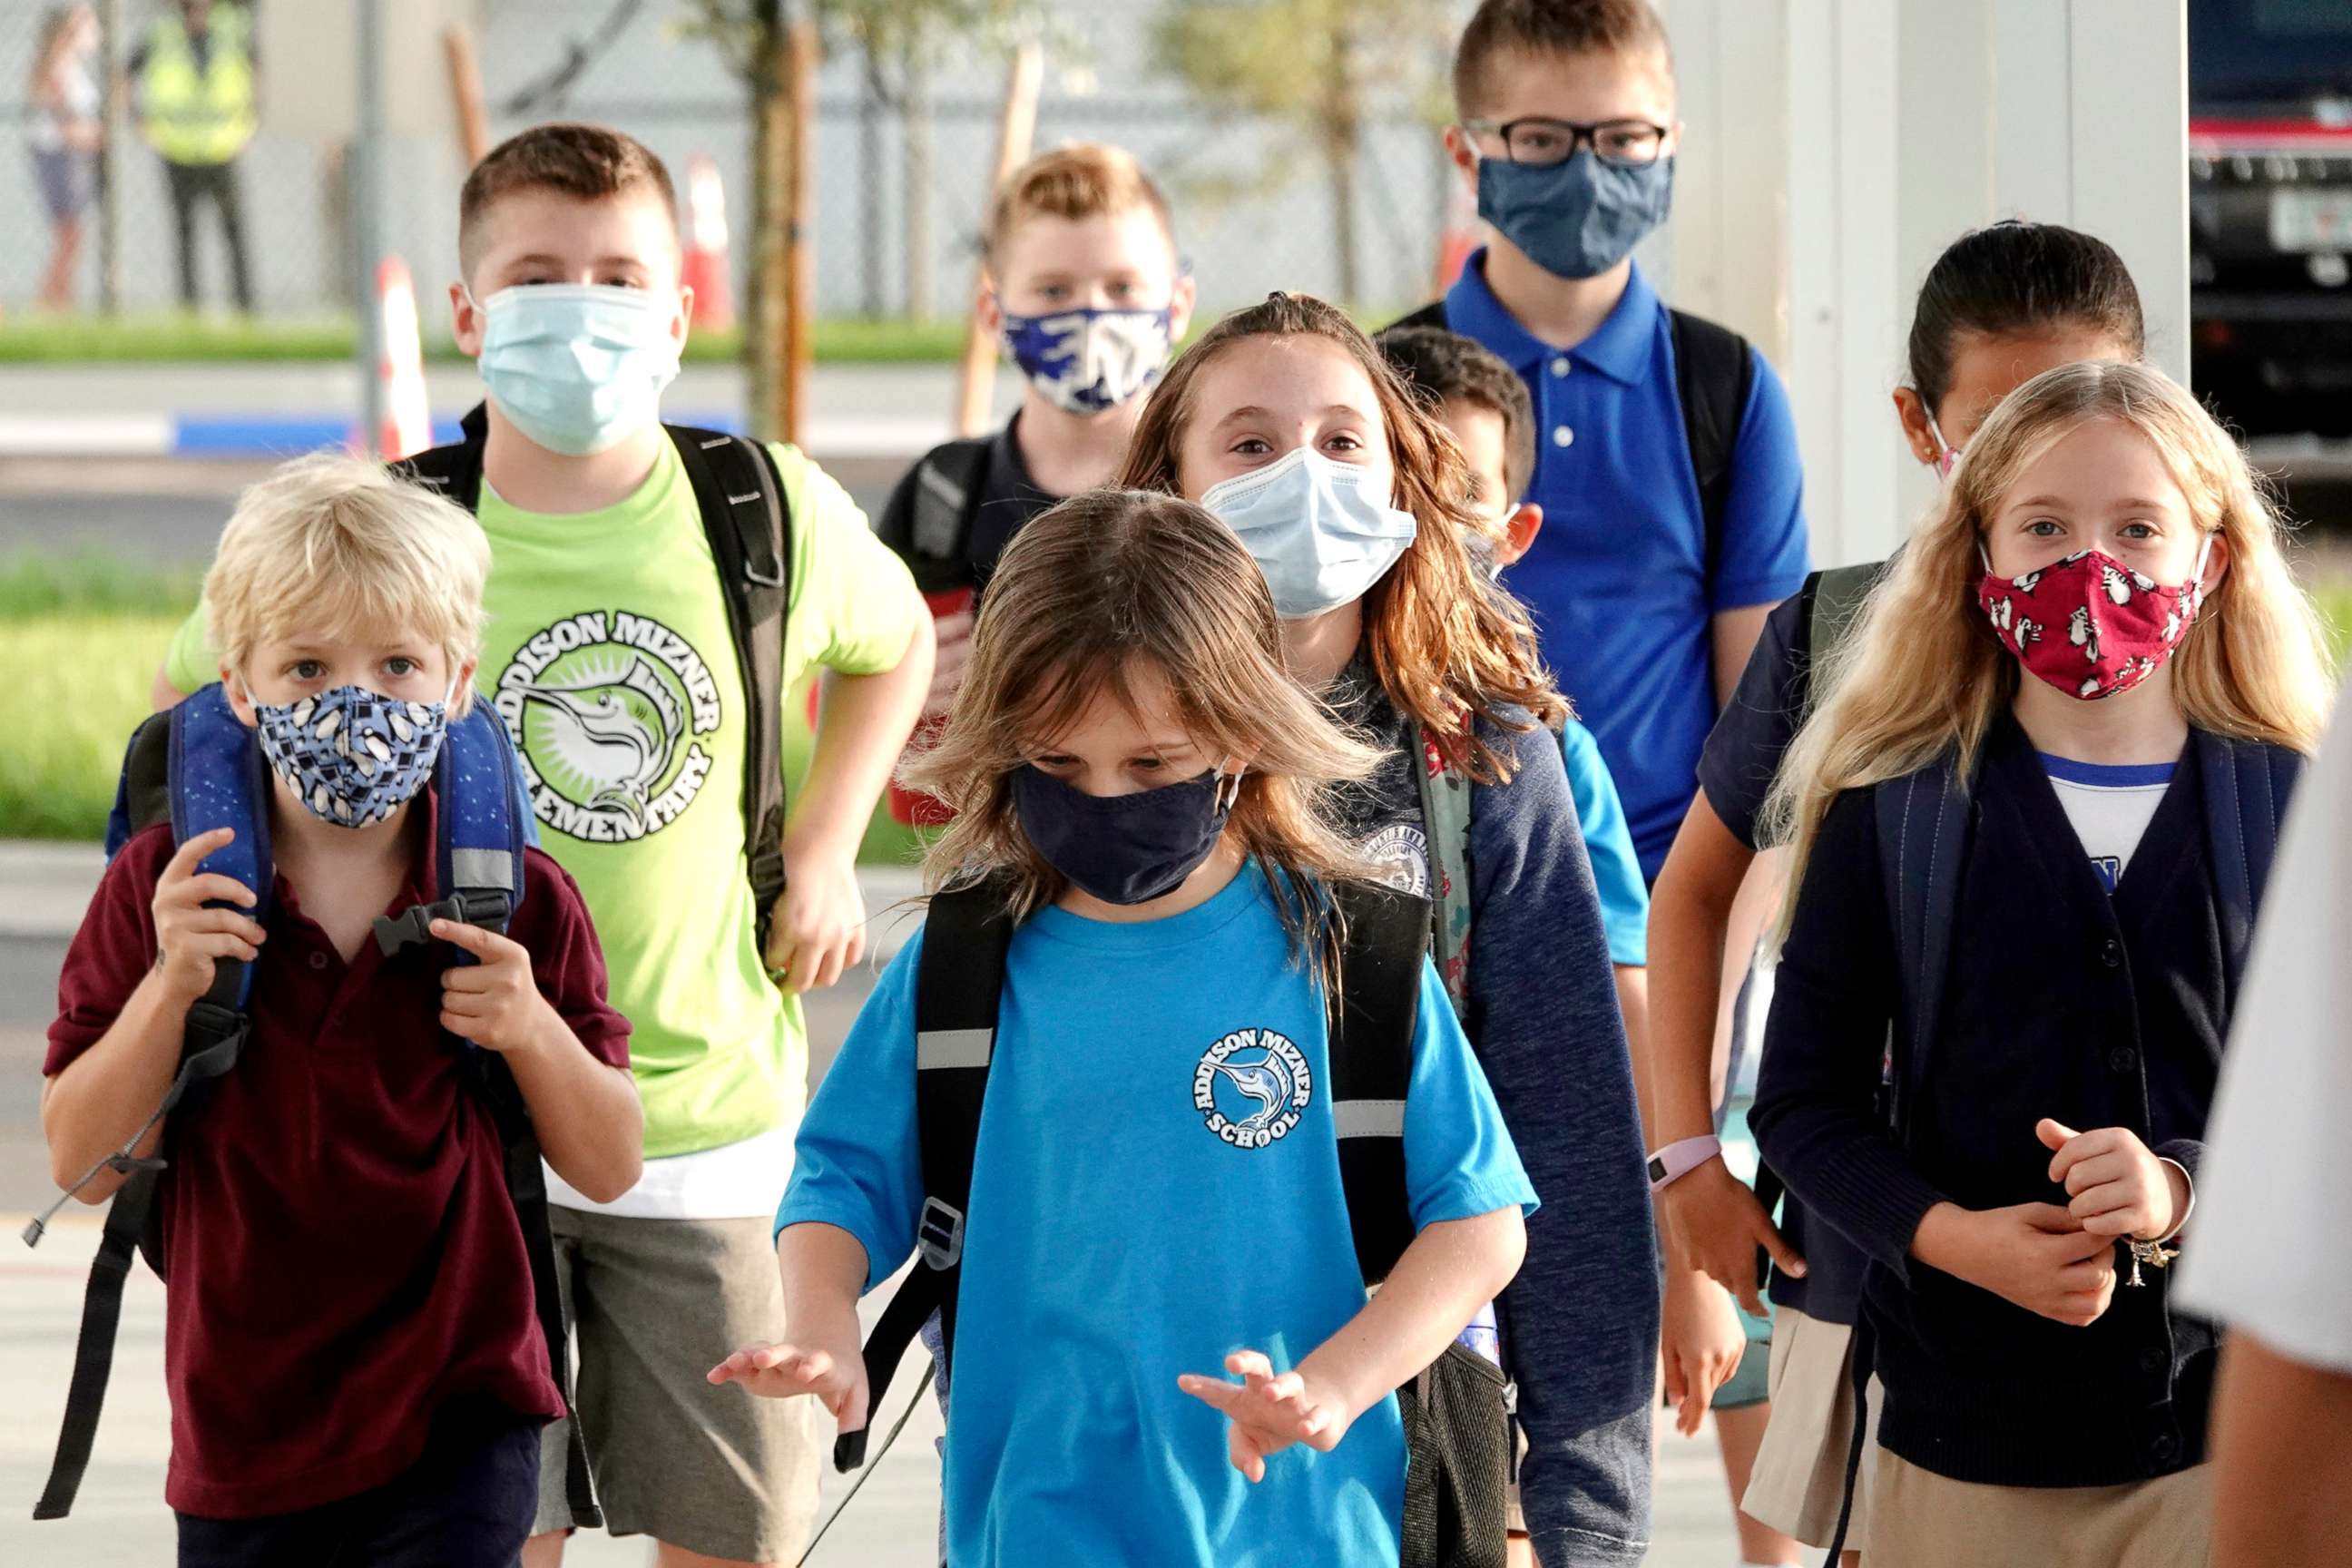 PHOTO: Students arrive to school on the first day at the Addison Mizner School in Boca Raton, Fla., Aug. 10, 2021. Palm Beach County Schools opened the school year with a masking requirement with an opt-out option.